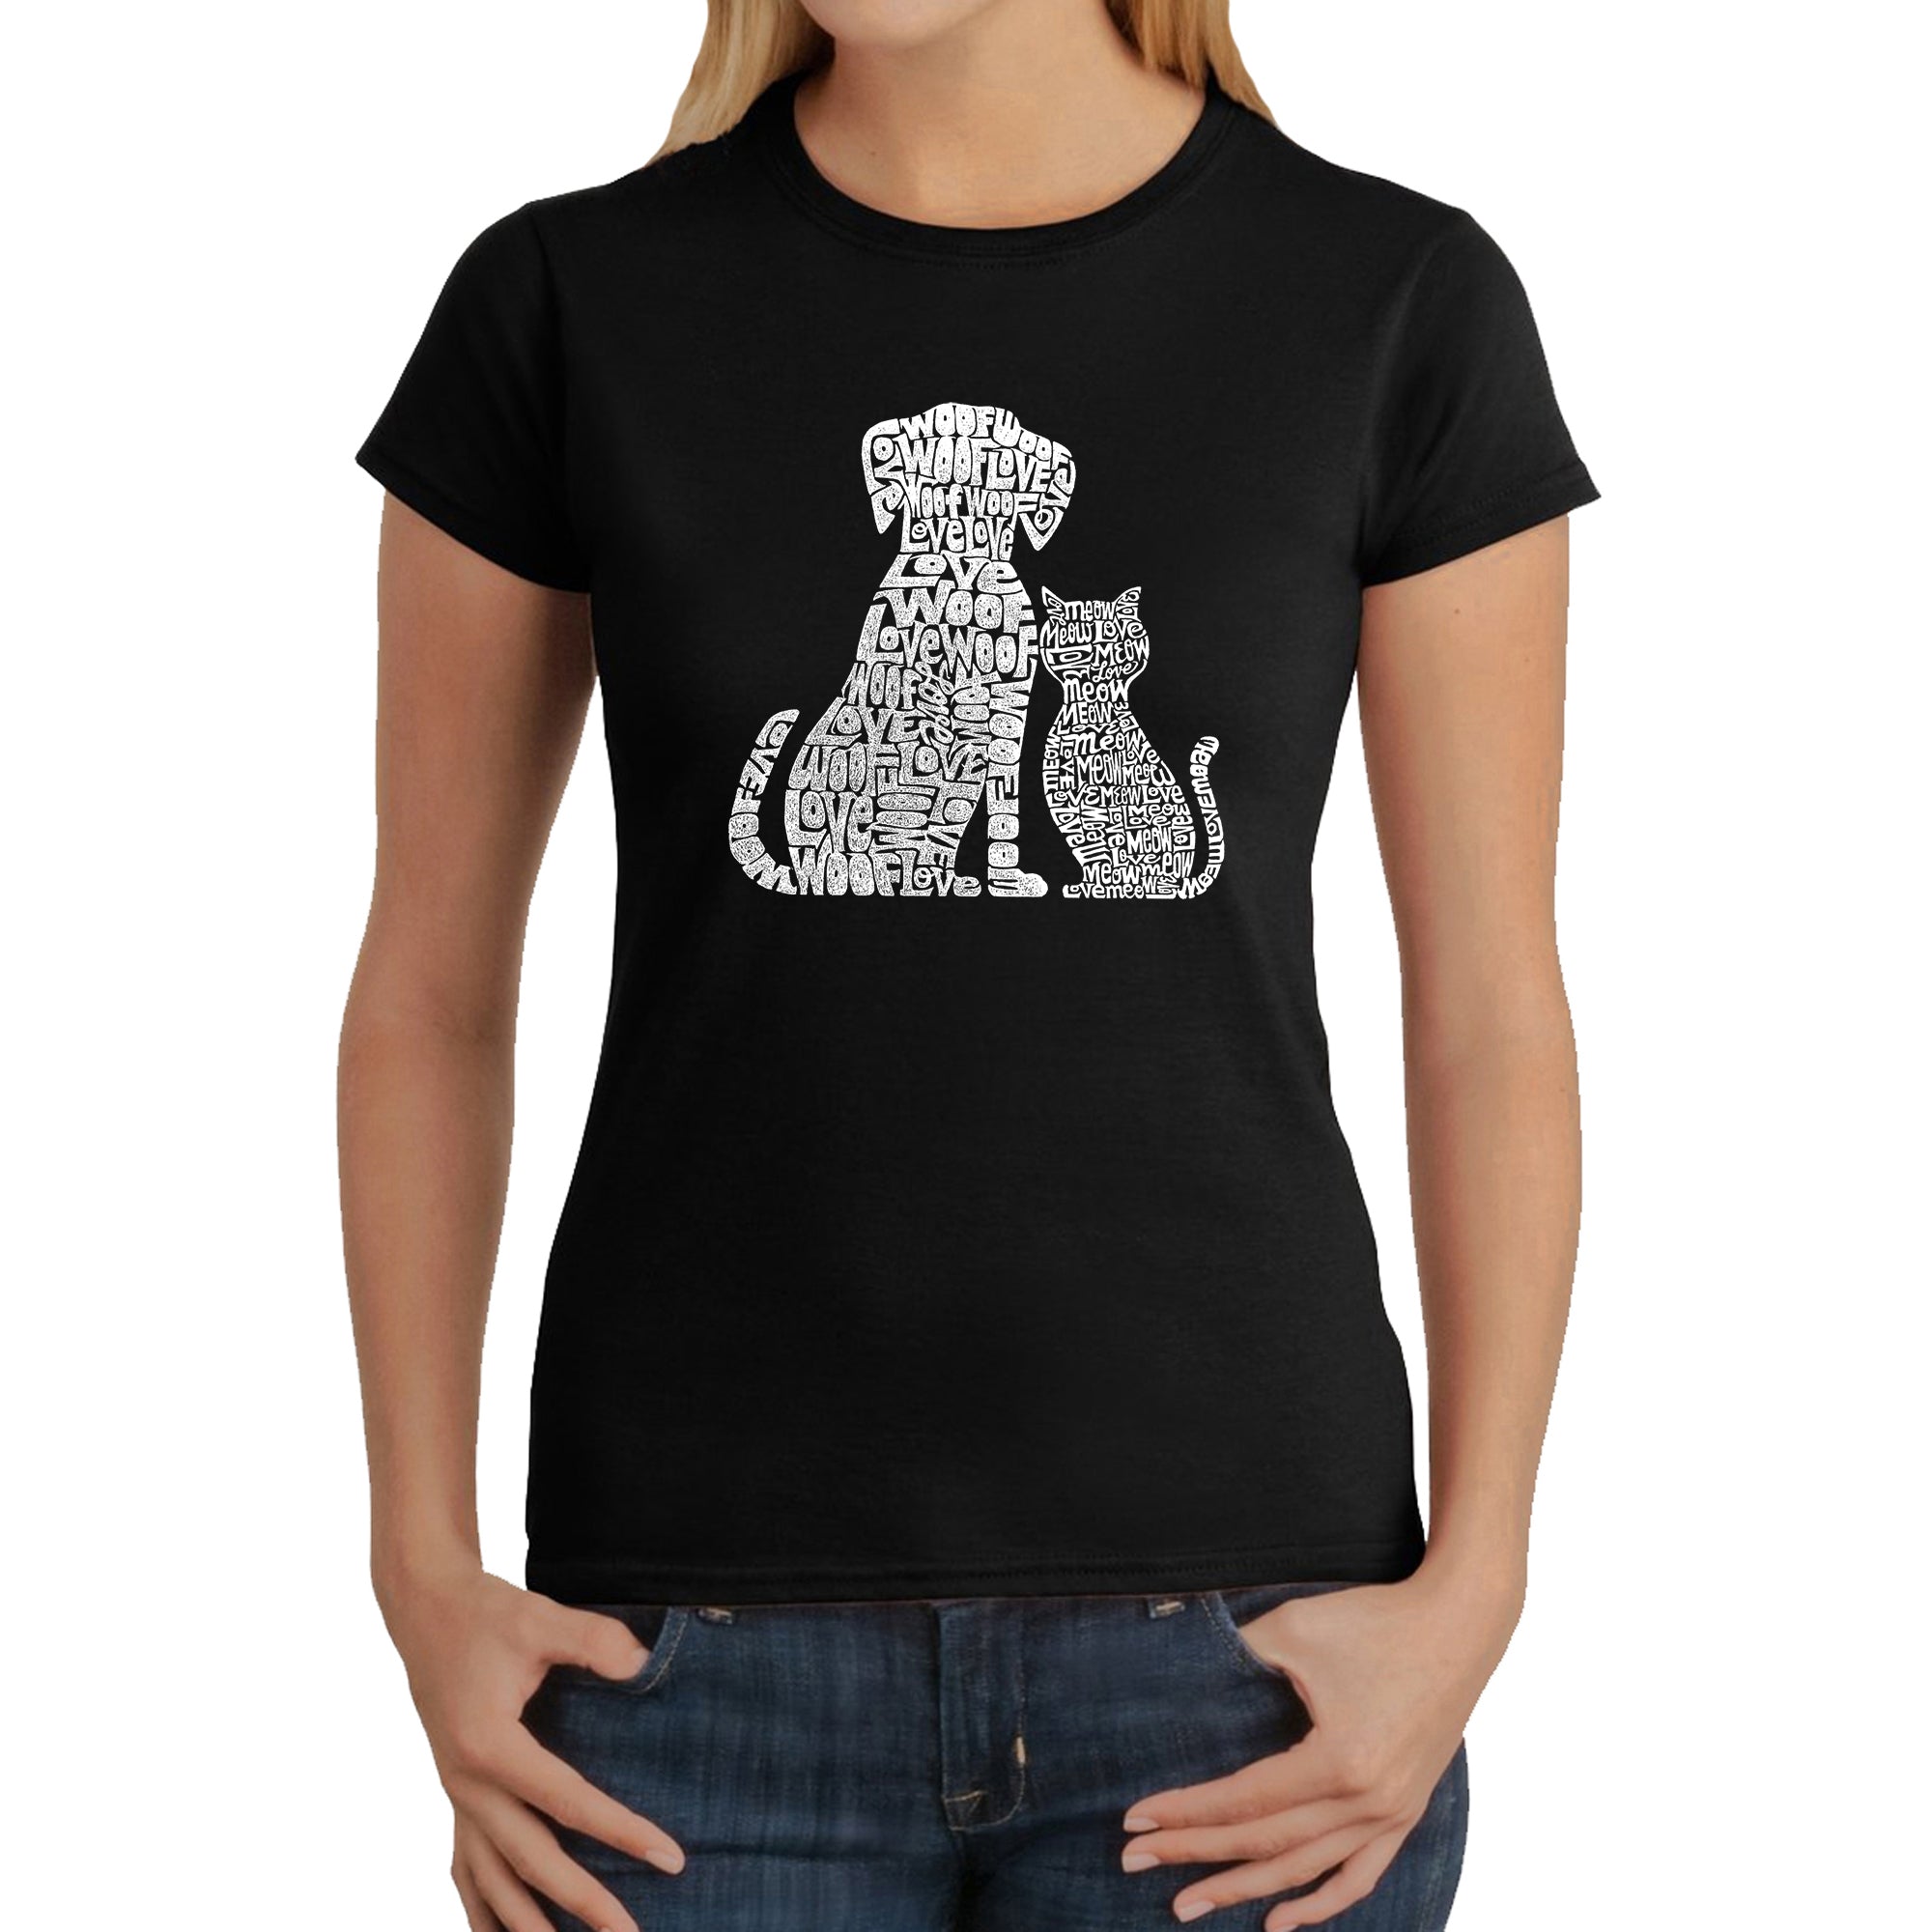 Dogs And Cats - Women's Word Art T-Shirt - Grey - Small